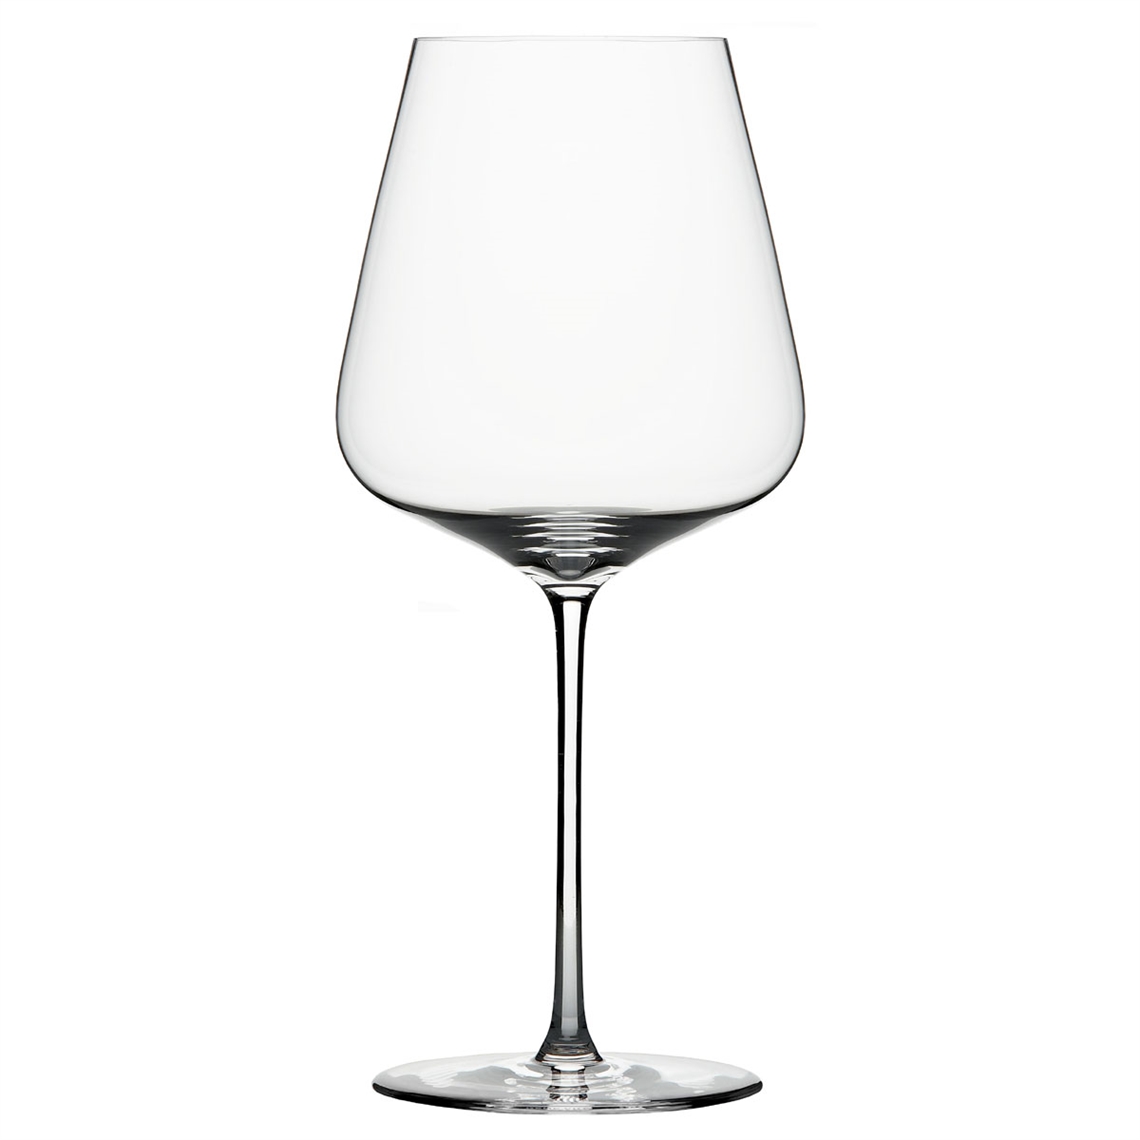 View more starlight from our Premium Mouth Blown Glassware range